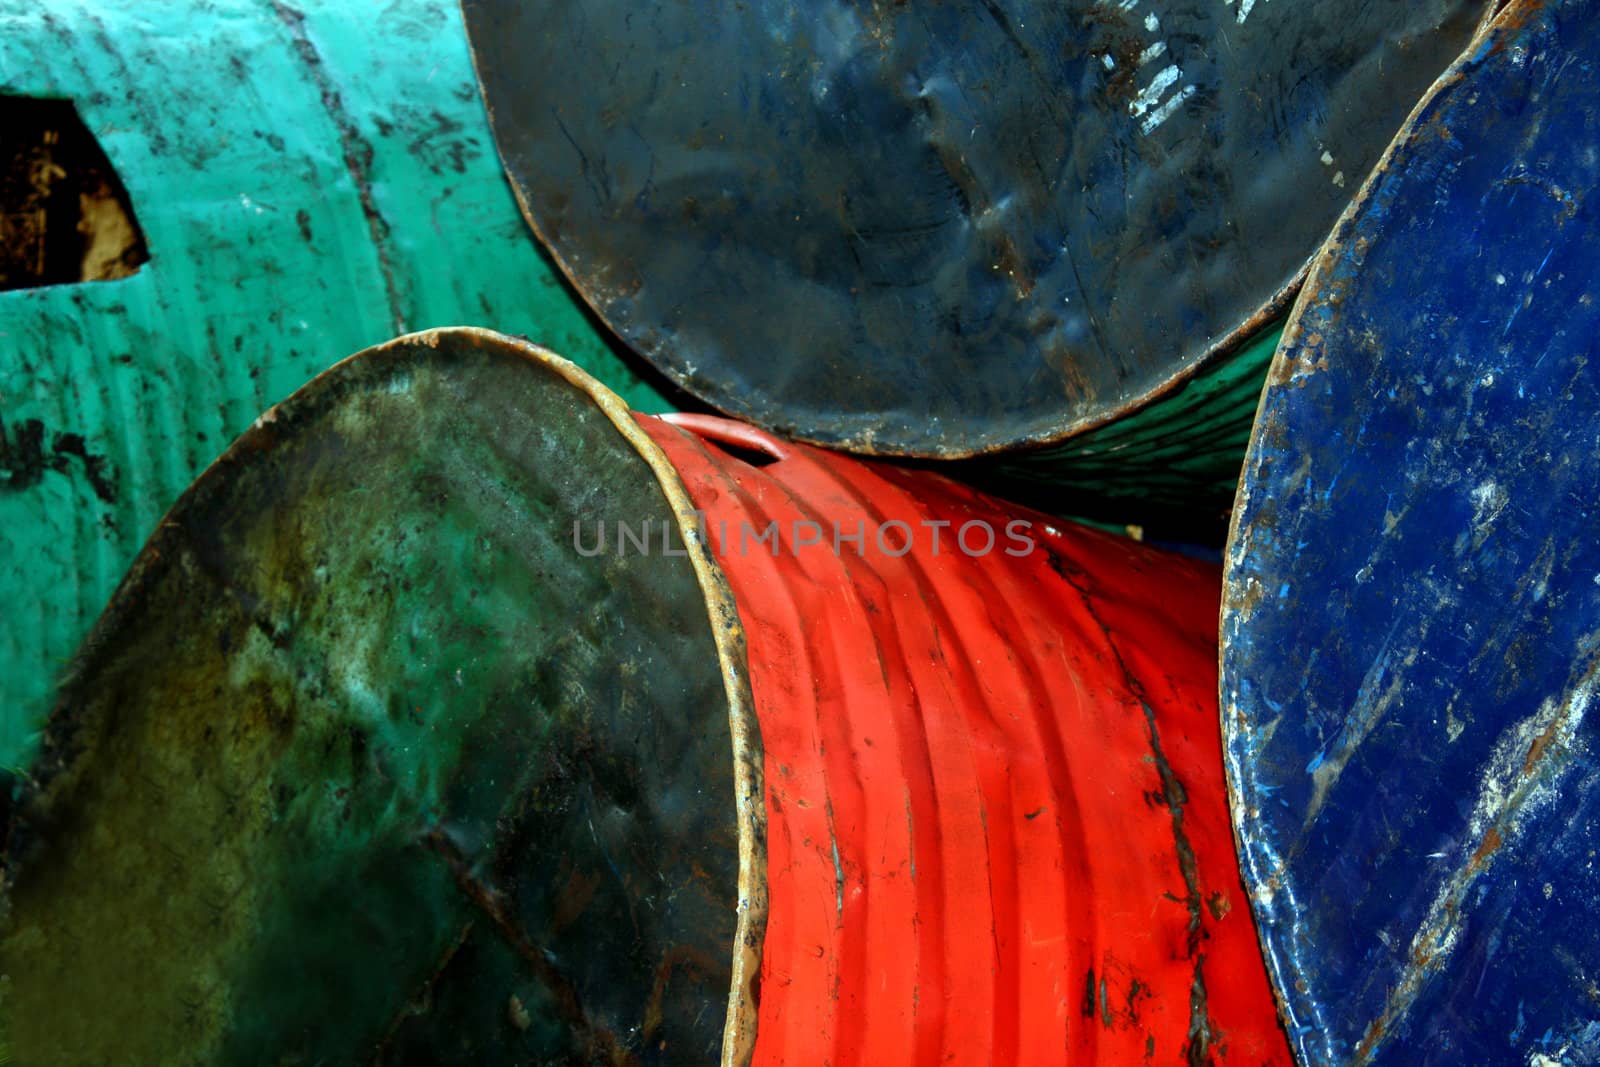 A background of old oil drums.